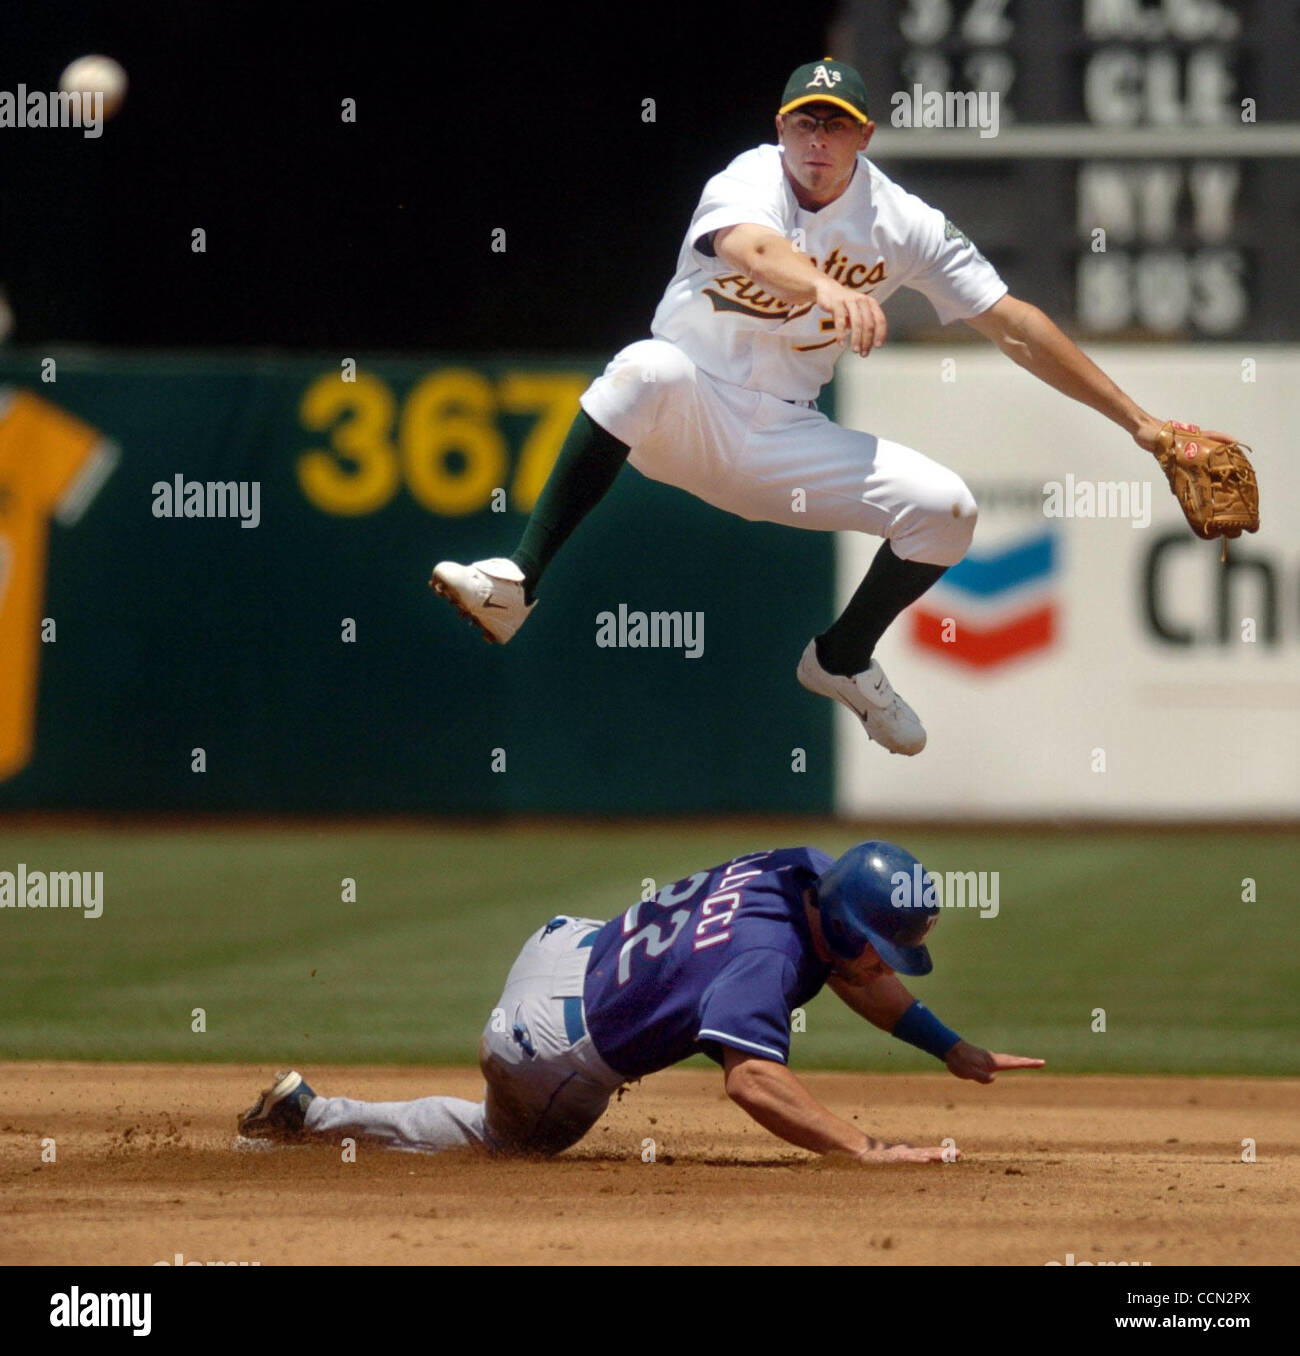 A's shortstop Bobby Crosby (cq) jumps over sliding Texas Ranger David Dellucci (cq) while completing a double play during the 2nd inning of their Major League Baseball game at the Network Associates Coliseum in Oakland, Calif. on Saturday, July 24, 2004. Ranger Michael Young hit into the inning-endi Stock Photo